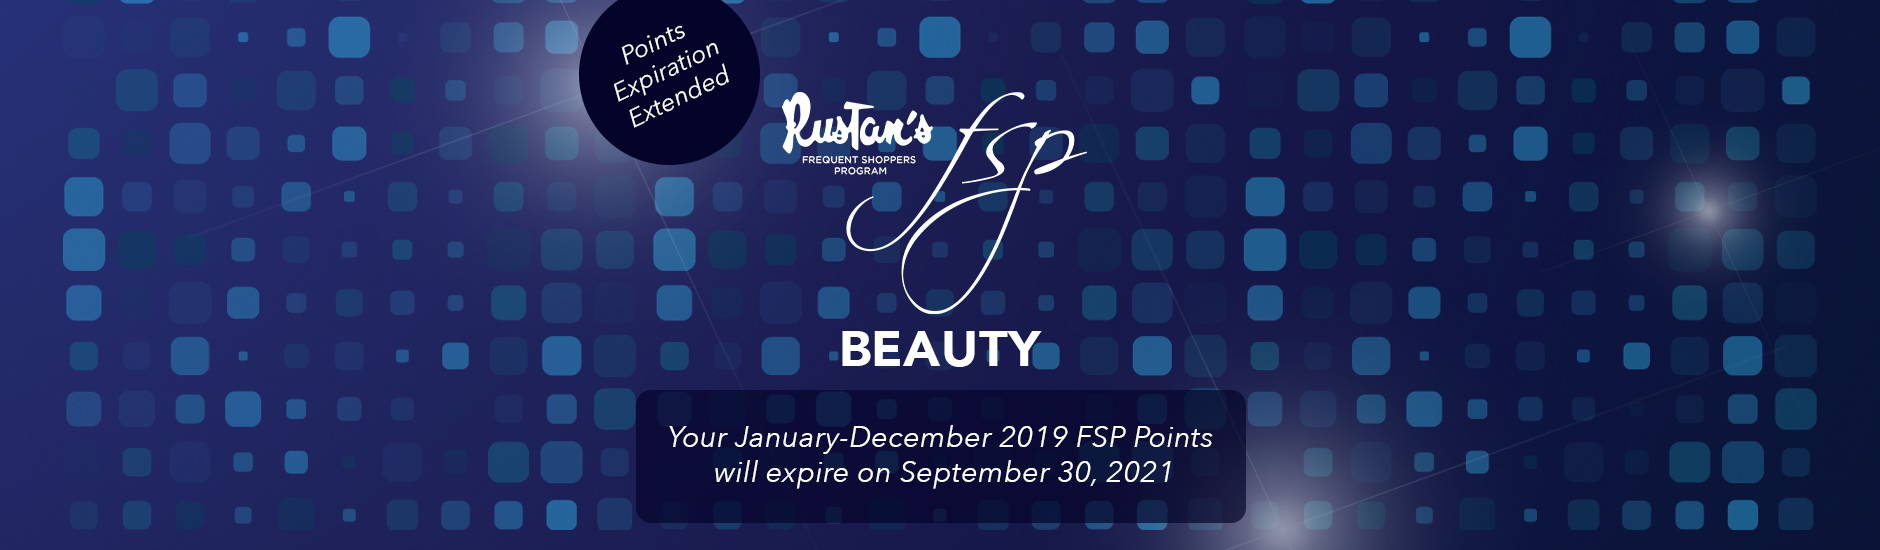 EXTENDED: Your FSP Points Are Waiting - Beauty